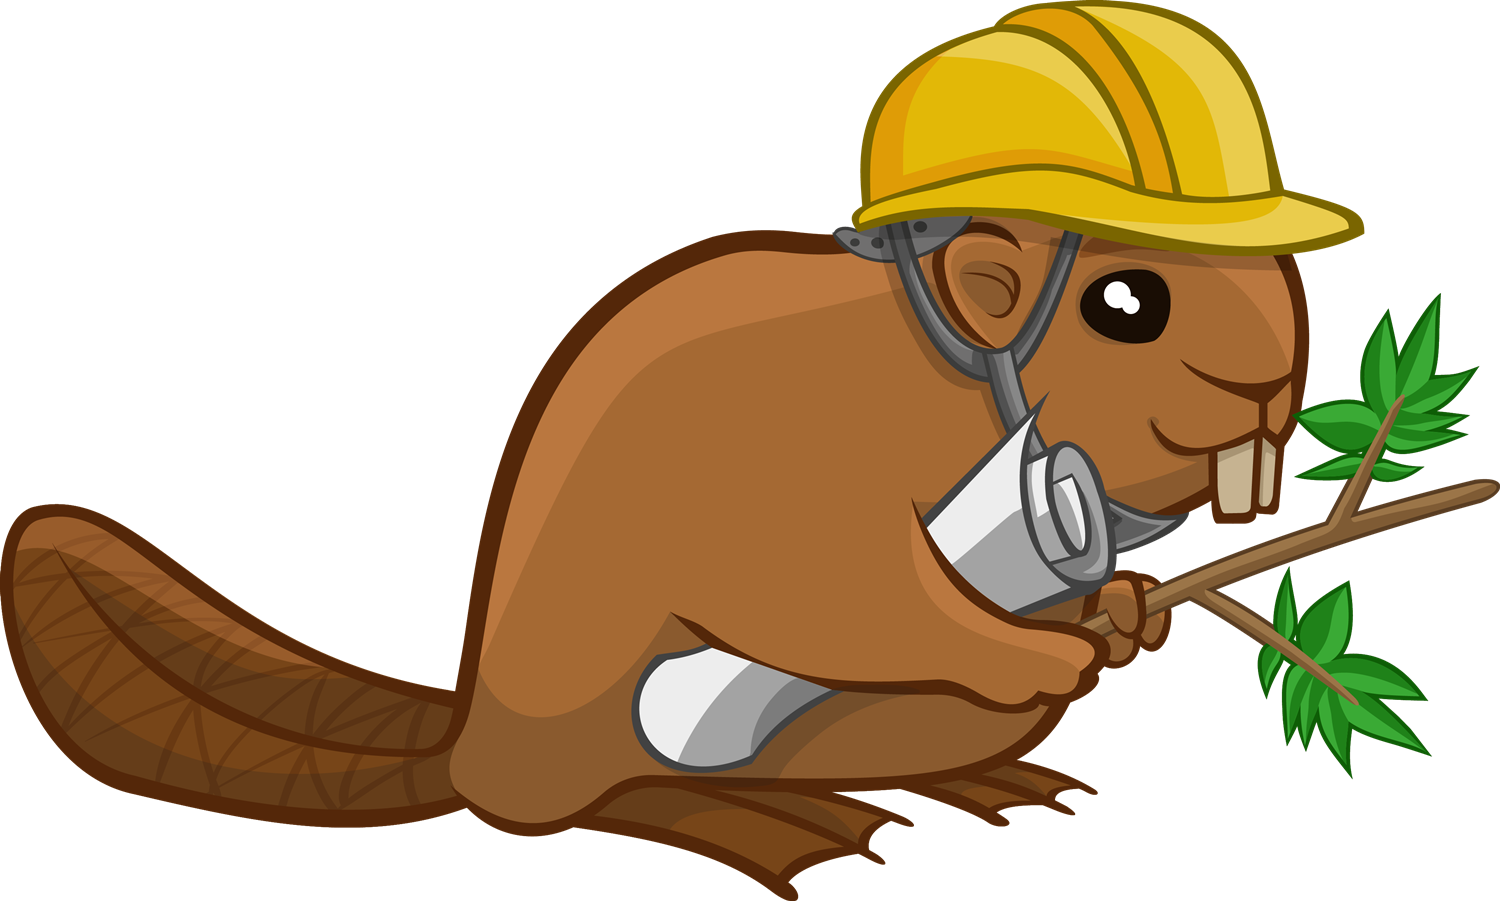 Clip Arts Related To : beaver cartoon png. view all Cute Beaver Cliparts). 